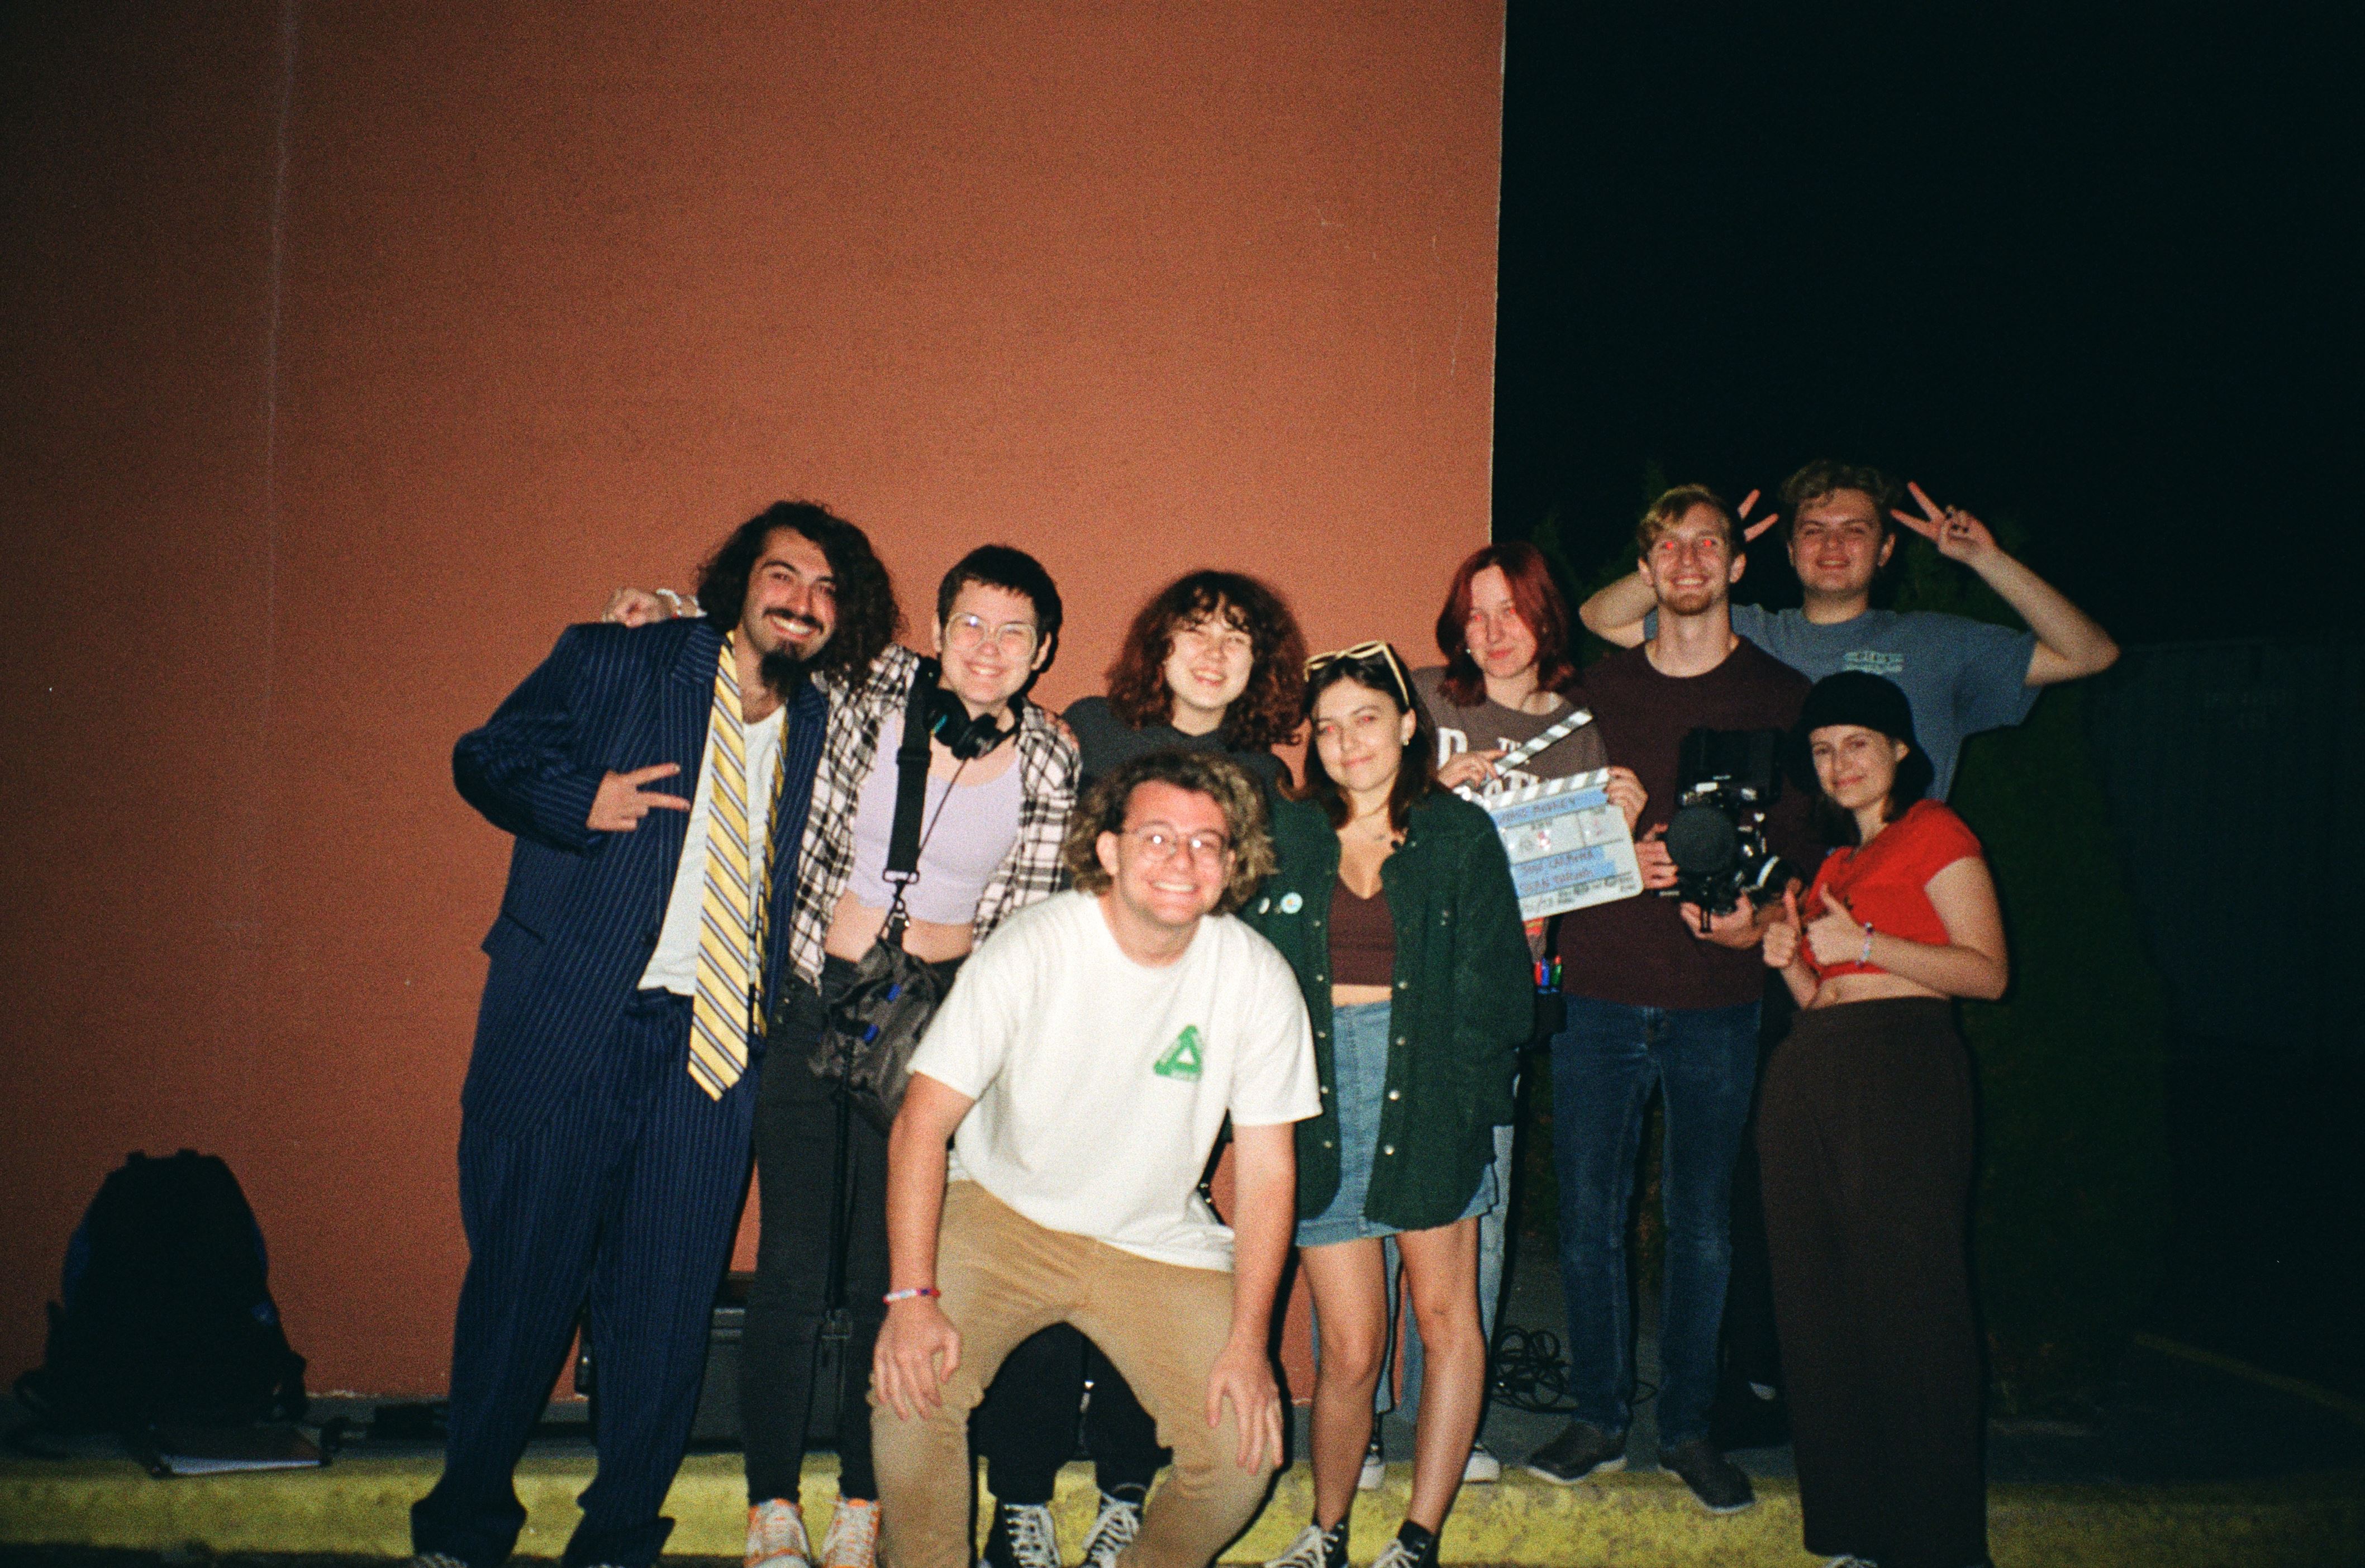 The cast and crew of "Grease Monkey", Carmona&squot;s first serious film project. Photo courtesy of Josh Carmona.